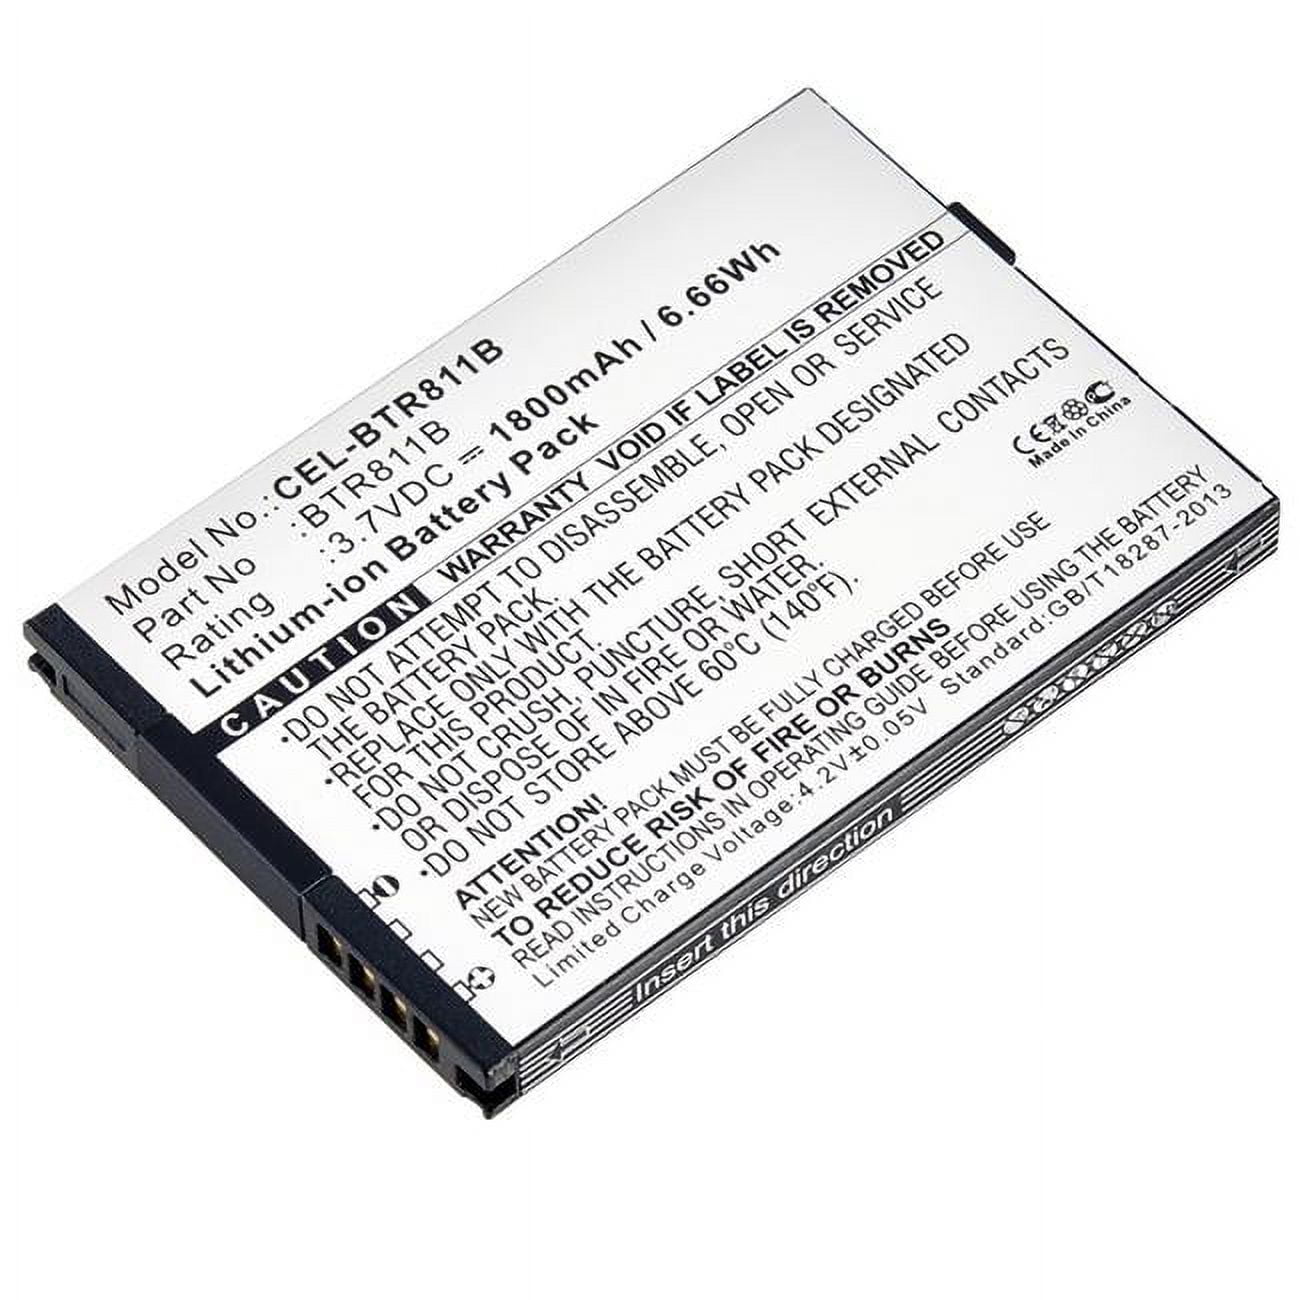 Picture of Ultralast CEL-BTR811B 3.7V & 1800 mAh Replacement Lithium-Ion Battery for Casio Commando 2 Cellular Phone